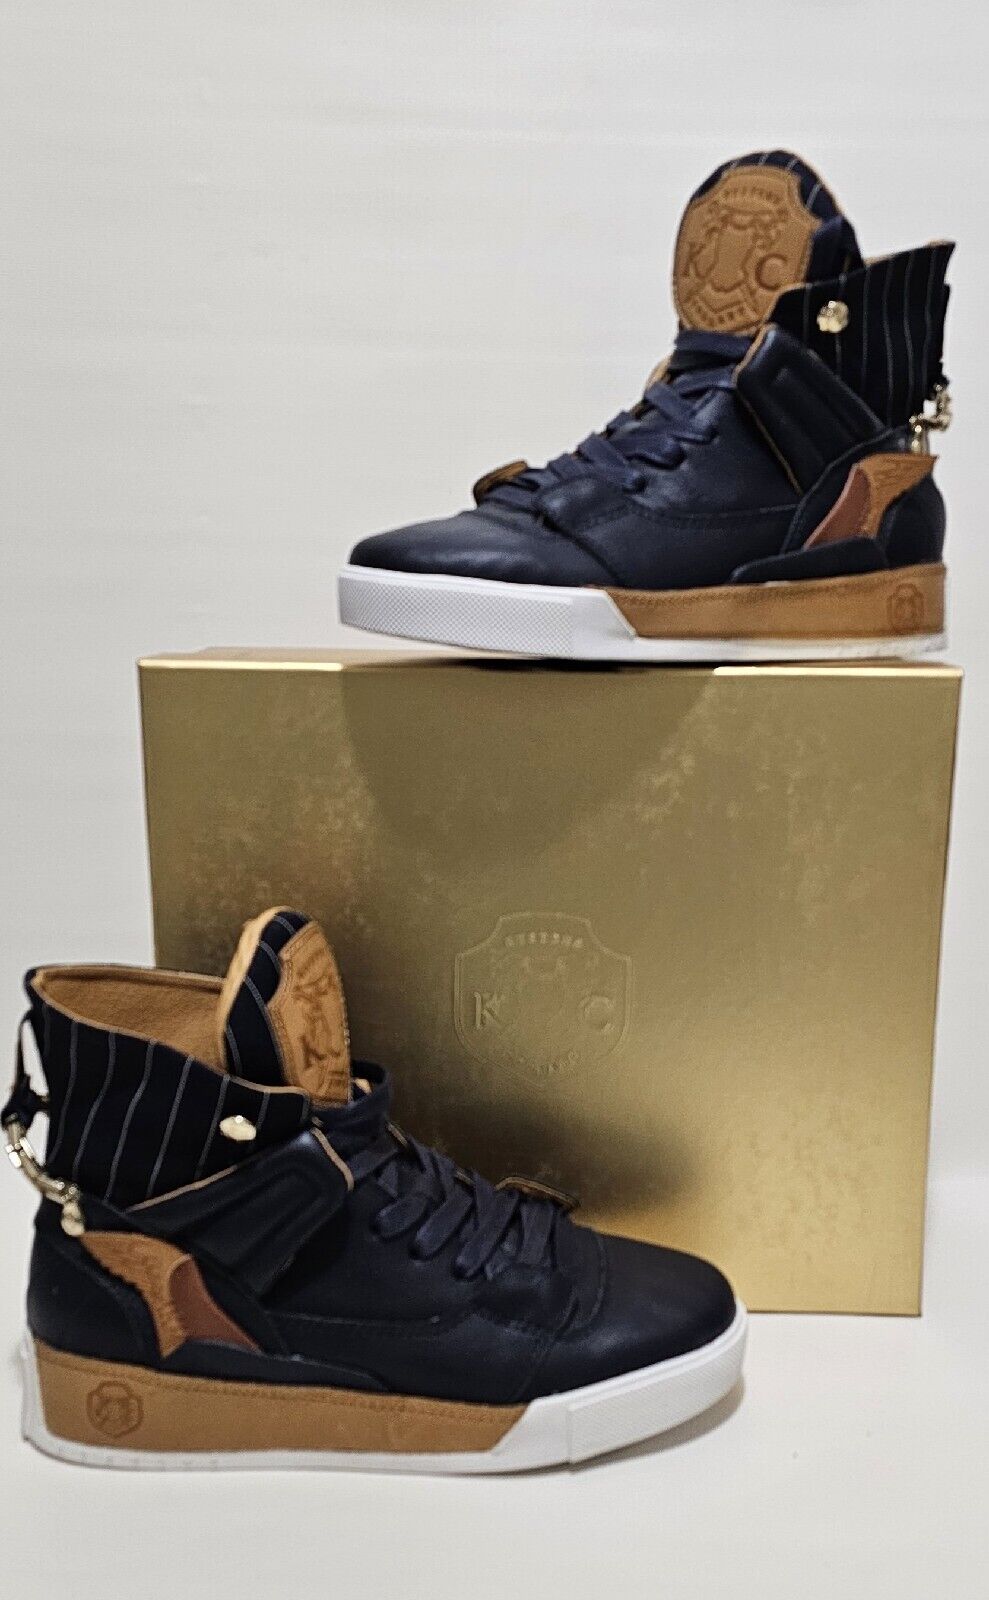 Kustome Collabo Renaissance Bleu Cuir Luxe Sneaker Collection Homme Taille 7